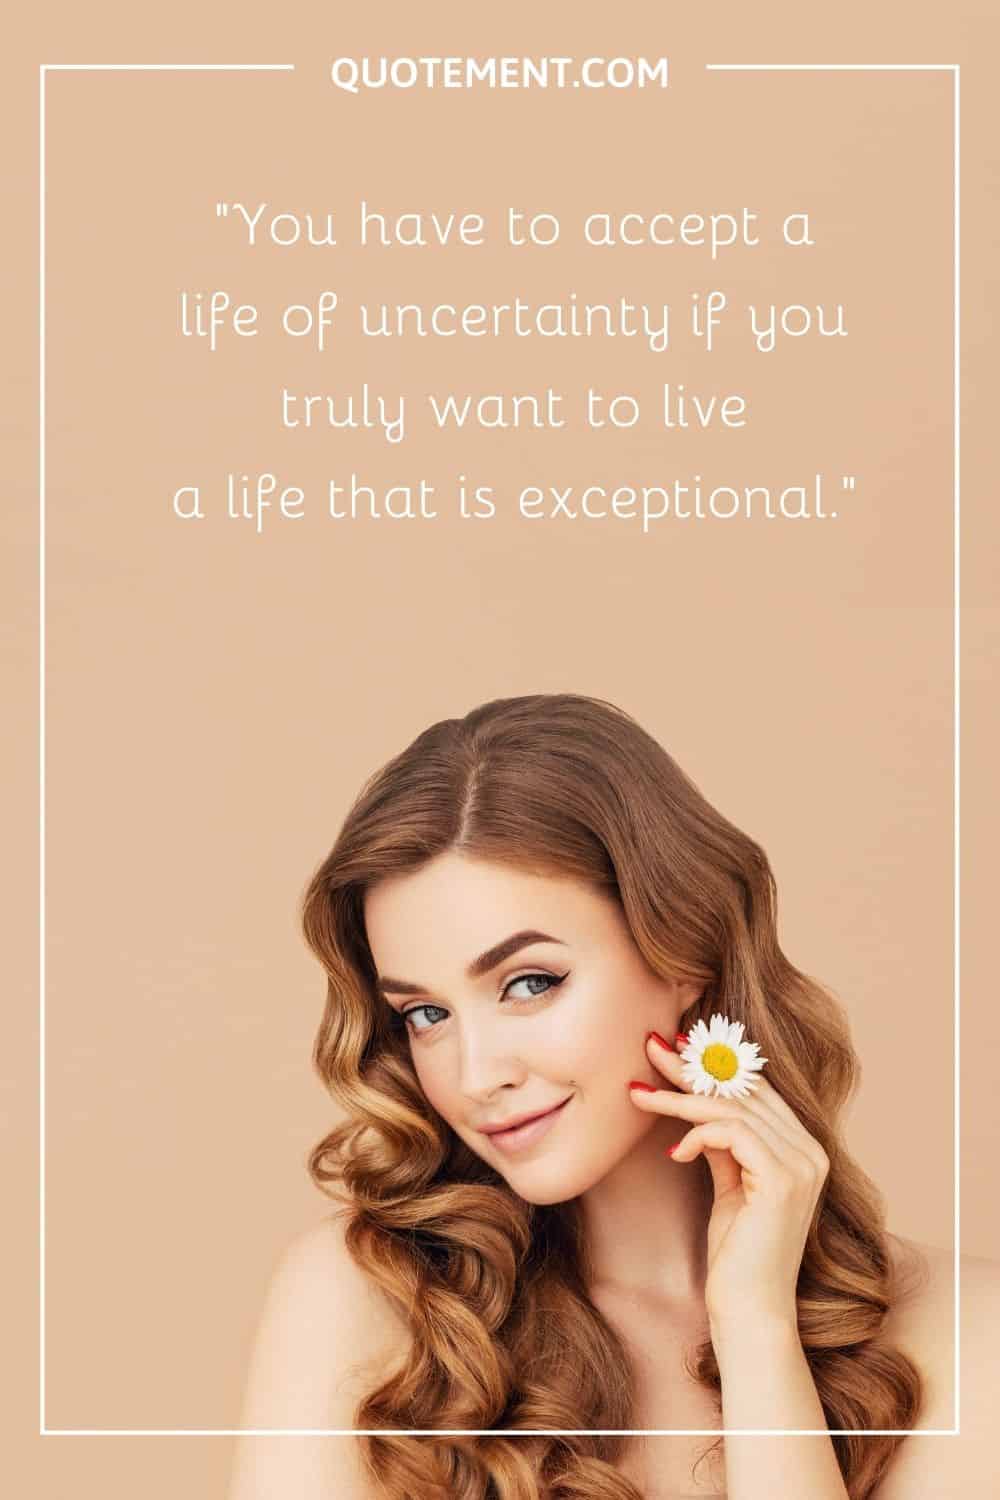 You have to accept a life of uncertainty